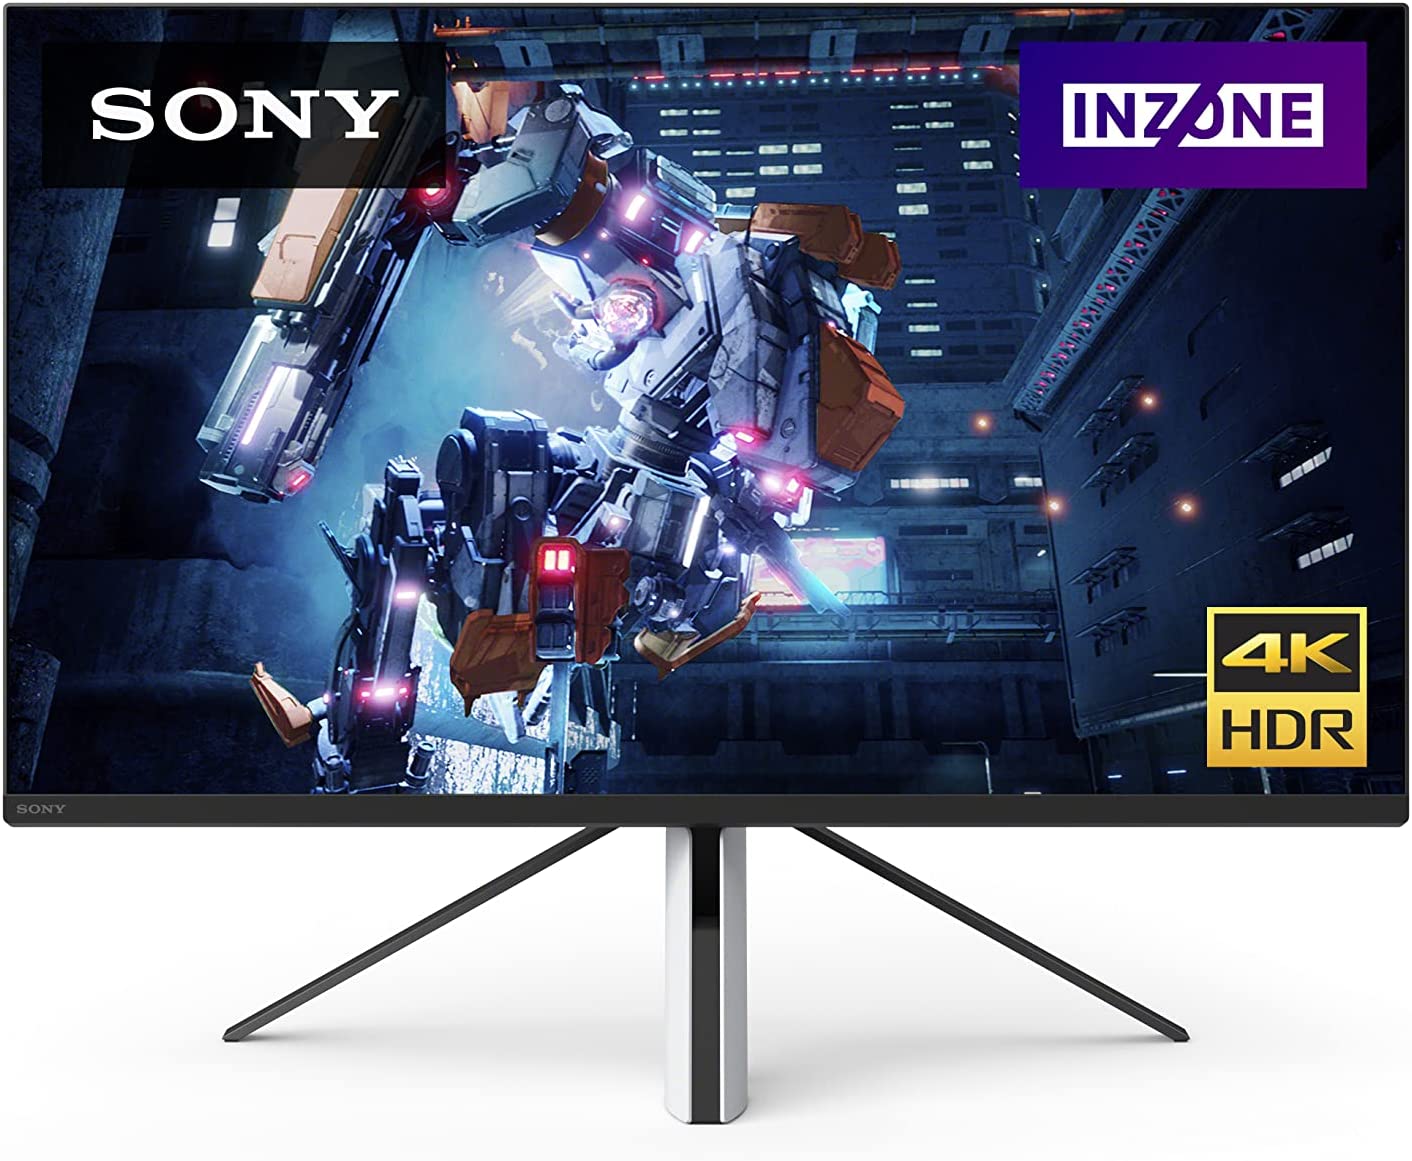 Sony 27-in INZONE M9 Full HD HDR 144Hz LED Computer Gaming Monitor